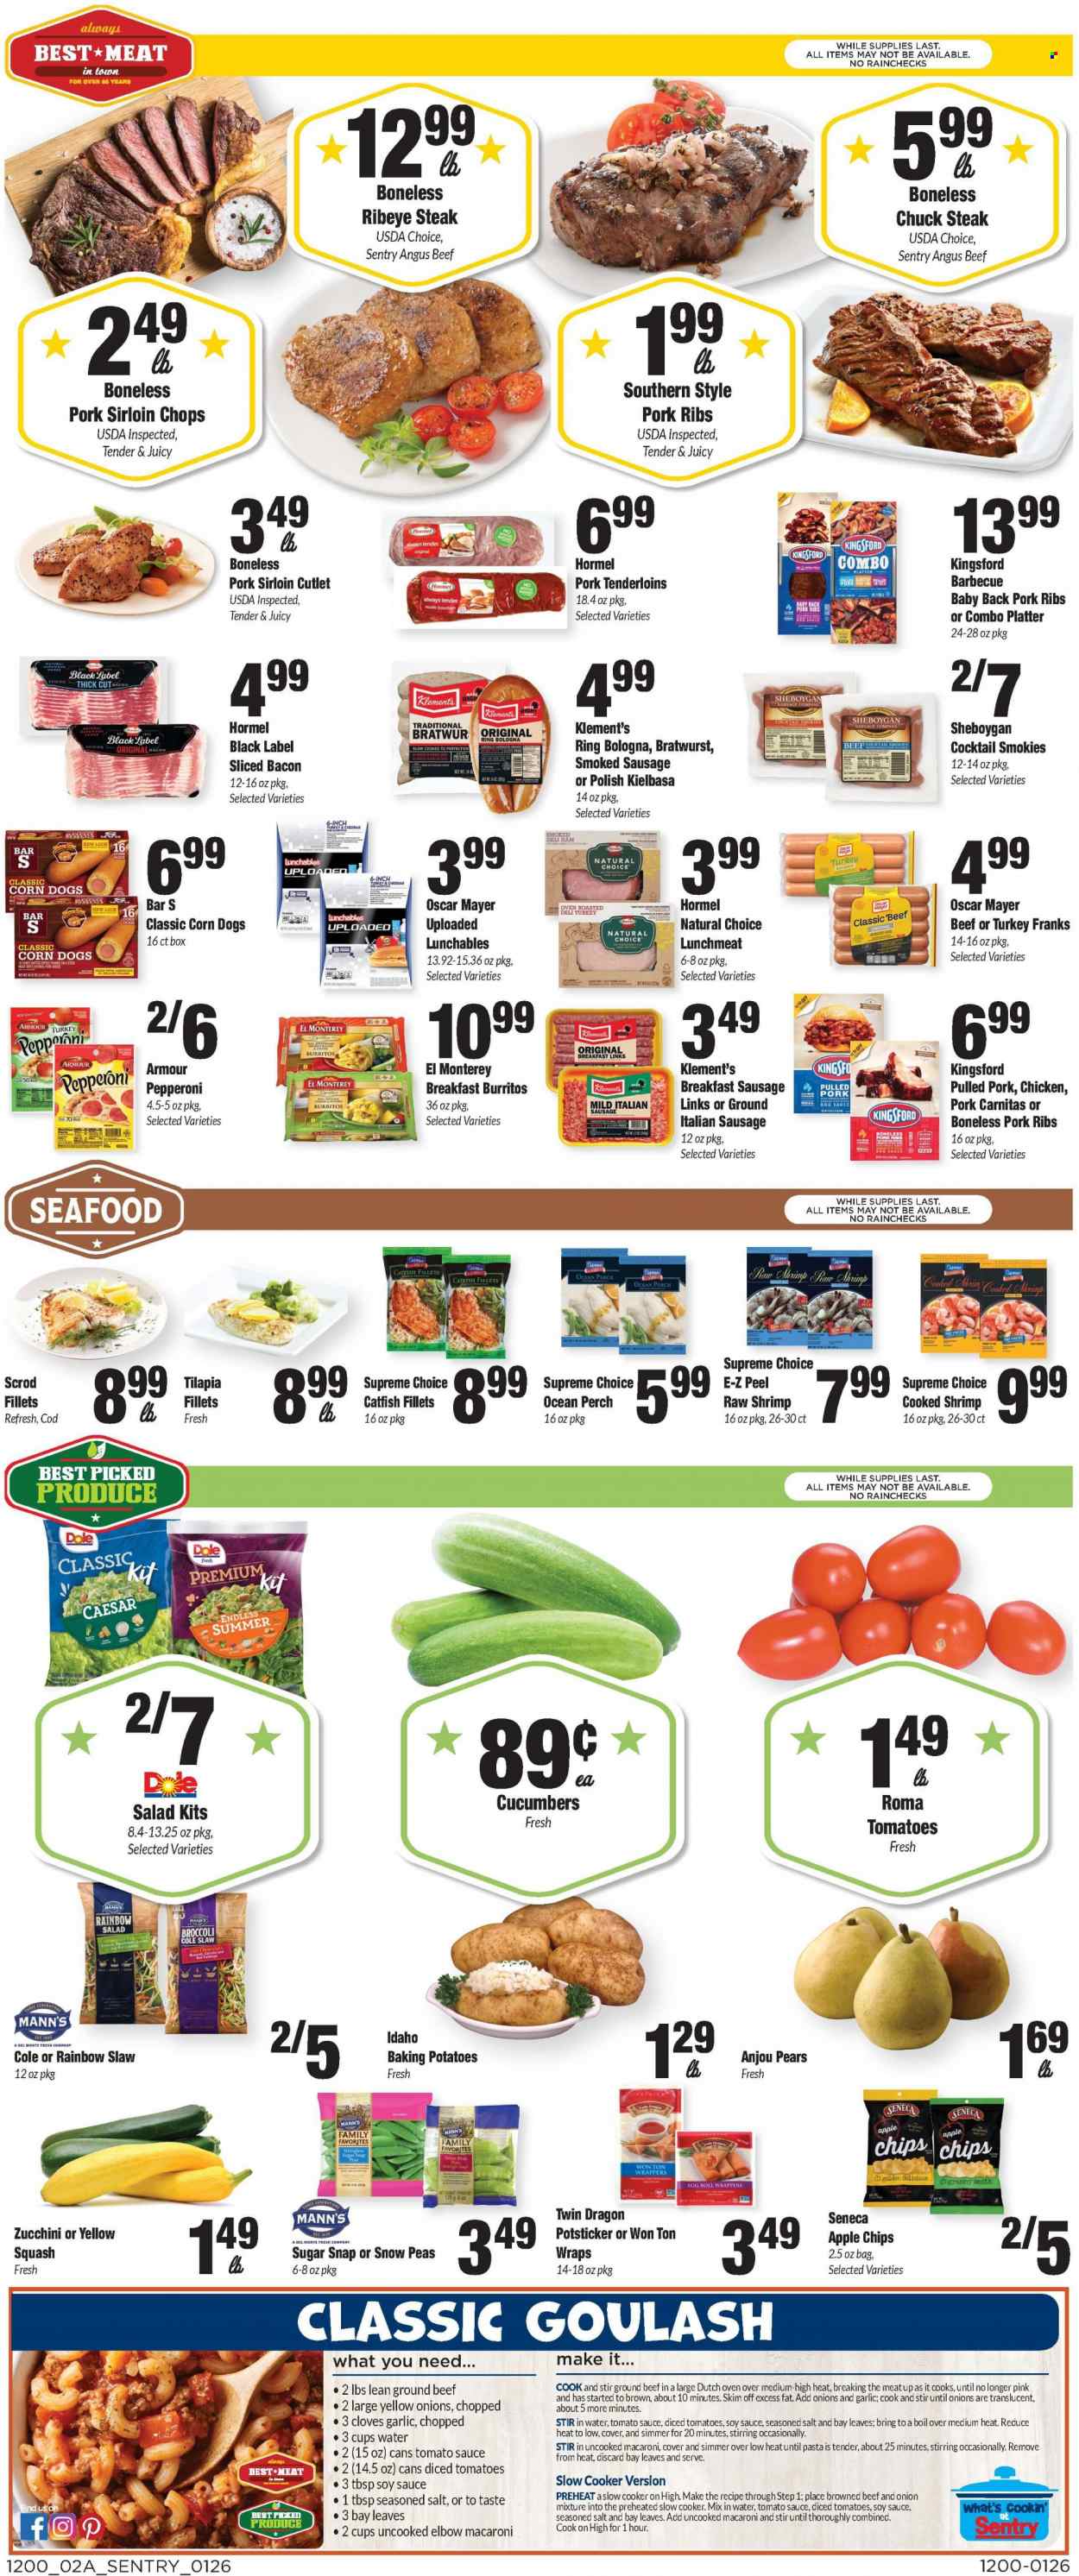 thumbnail - Sentry Foods Flyer - 01/26/2023 - 02/01/2023 - Sales products - wraps, broccoli, cucumber, garlic, zucchini, potatoes, Dole, yellow squash, pears, Golden Delicious, Granny Smith, catfish, cod, tilapia, perch, seafood, shrimps, macaroni, pasta, egg rolls, burrito, Lunchables, pulled pork, Hormel, Kingsford, bacon, ham, Oscar Mayer, bratwurst, sausage, smoked sausage, pepperoni, italian sausage, kielbasa, lunch meat, cheese, eggs, snow peas, chips, sugar, tomato sauce, diced tomatoes, Del Monte, cloves, BBQ sauce, soy sauce, Boost, bourbon, beef meat, beef steak, ground beef, steak, chuck steak, ribeye steak, ribs, pork loin, pork meat, pork ribs, pork tenderloin, pork back ribs. Page 2.